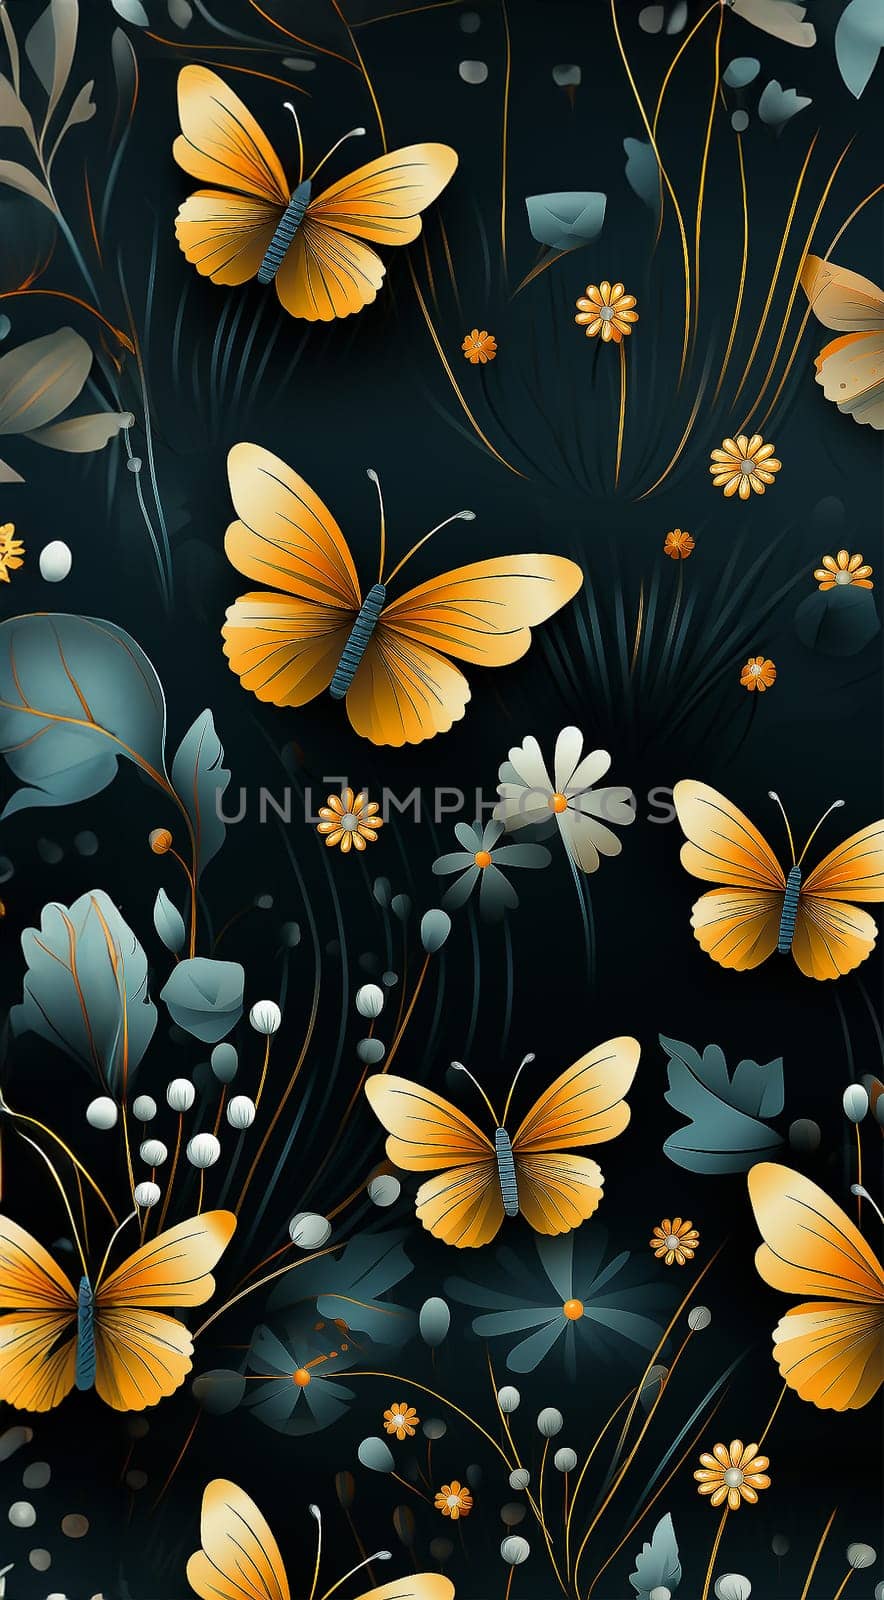 Cute wildflowers and night butterflies seamless pattern. Flowers and insects. art illustration. Navy blue background and gold foil printing. Dark floral pattern for textiles, paper, wallpapers. by Annebel146